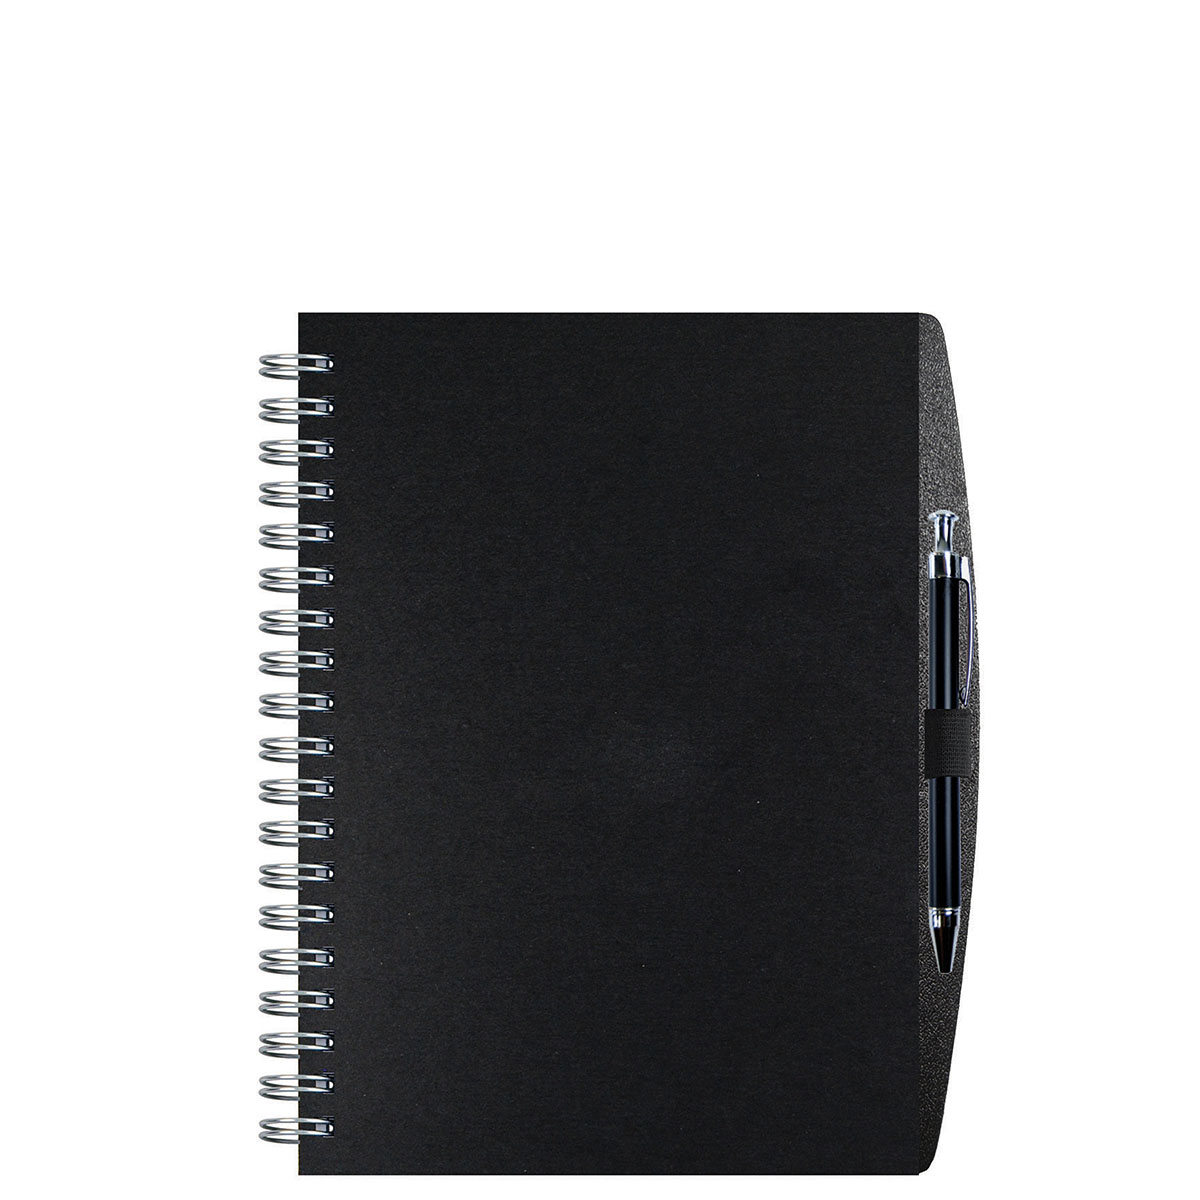 Black 7 x 10 Journal with Pen (100 Sheets)